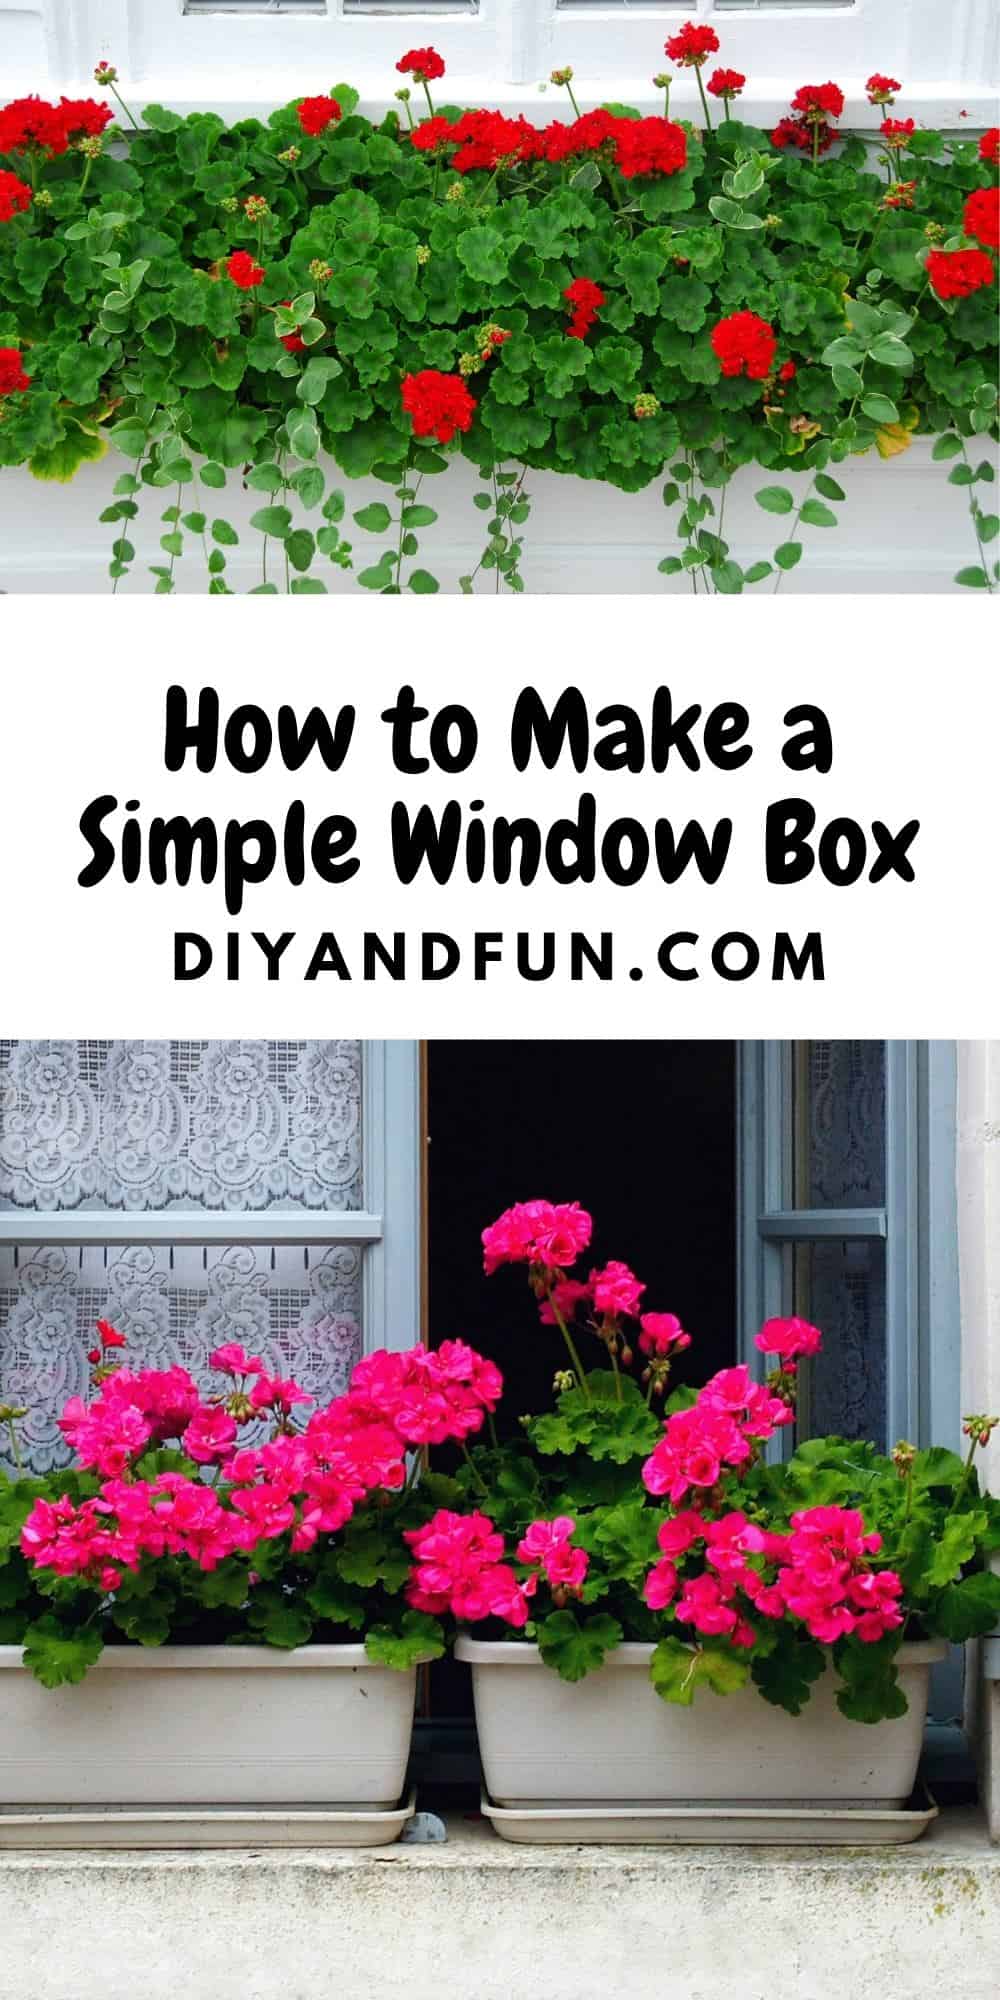 How to Make a Simple Window Box, an easy guide for planning, designing, and planting a new window box for your home.